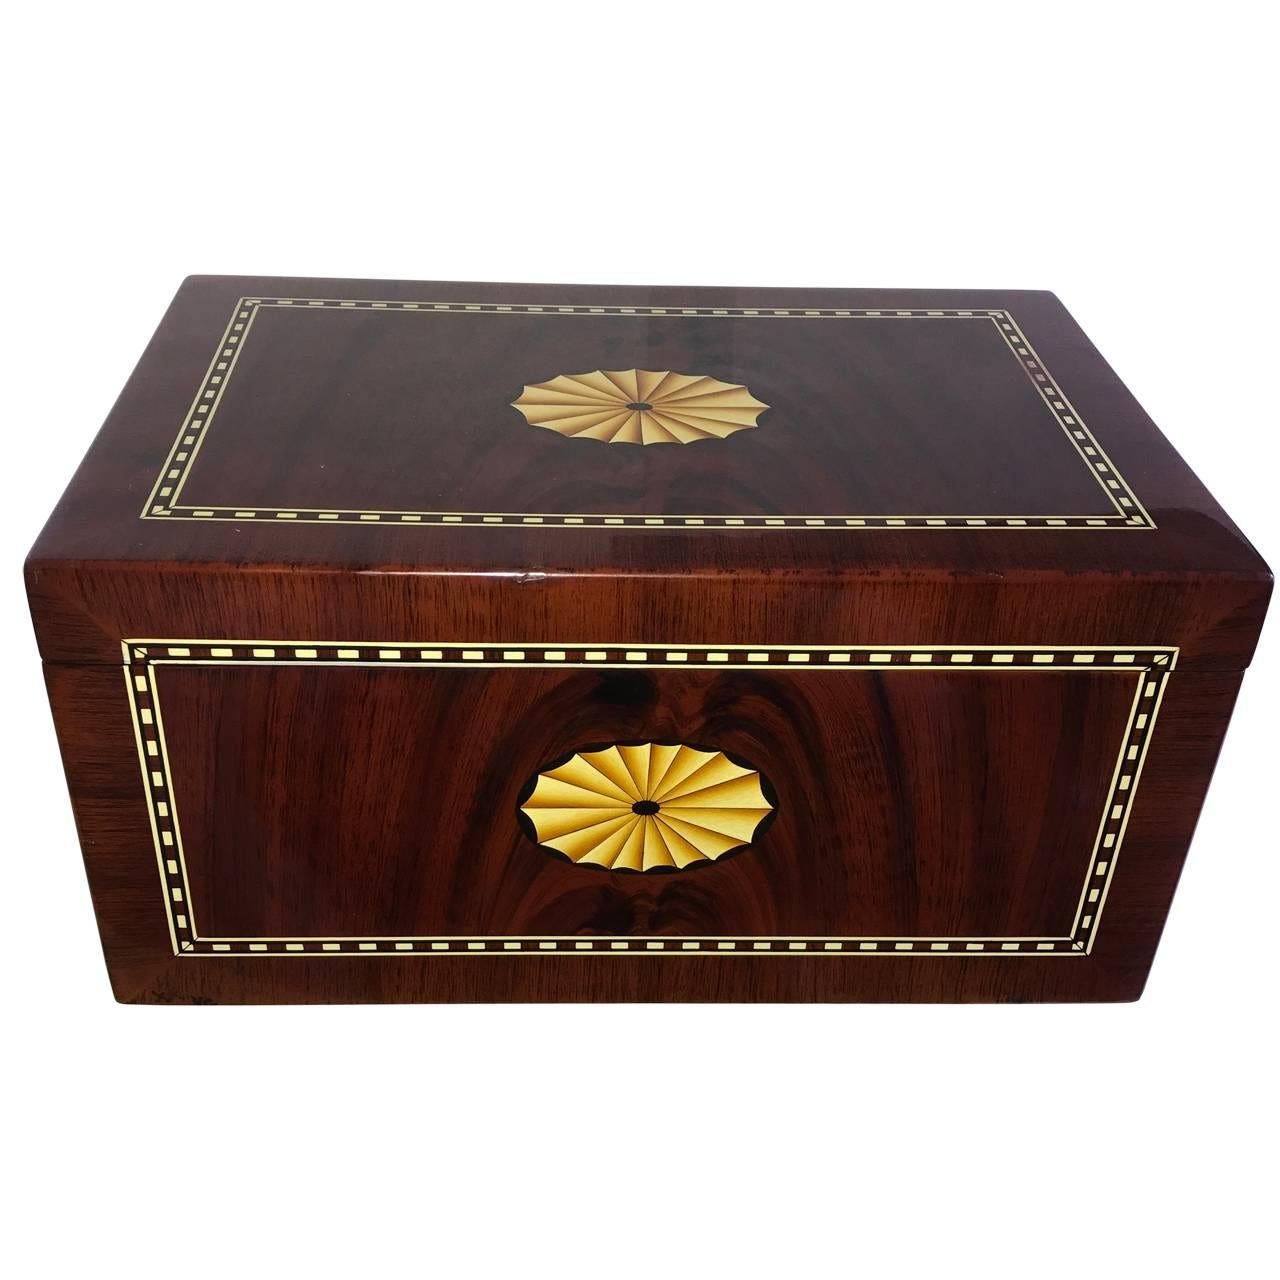 Nice large vintage humidor with Classic lemon-wood veneer decoration on the top and front. Note the hygrometer is missing, but can be easily replaced.

Maker is likely to be El Rey Del Mundo of Cuba, but I have not been able to verify this with